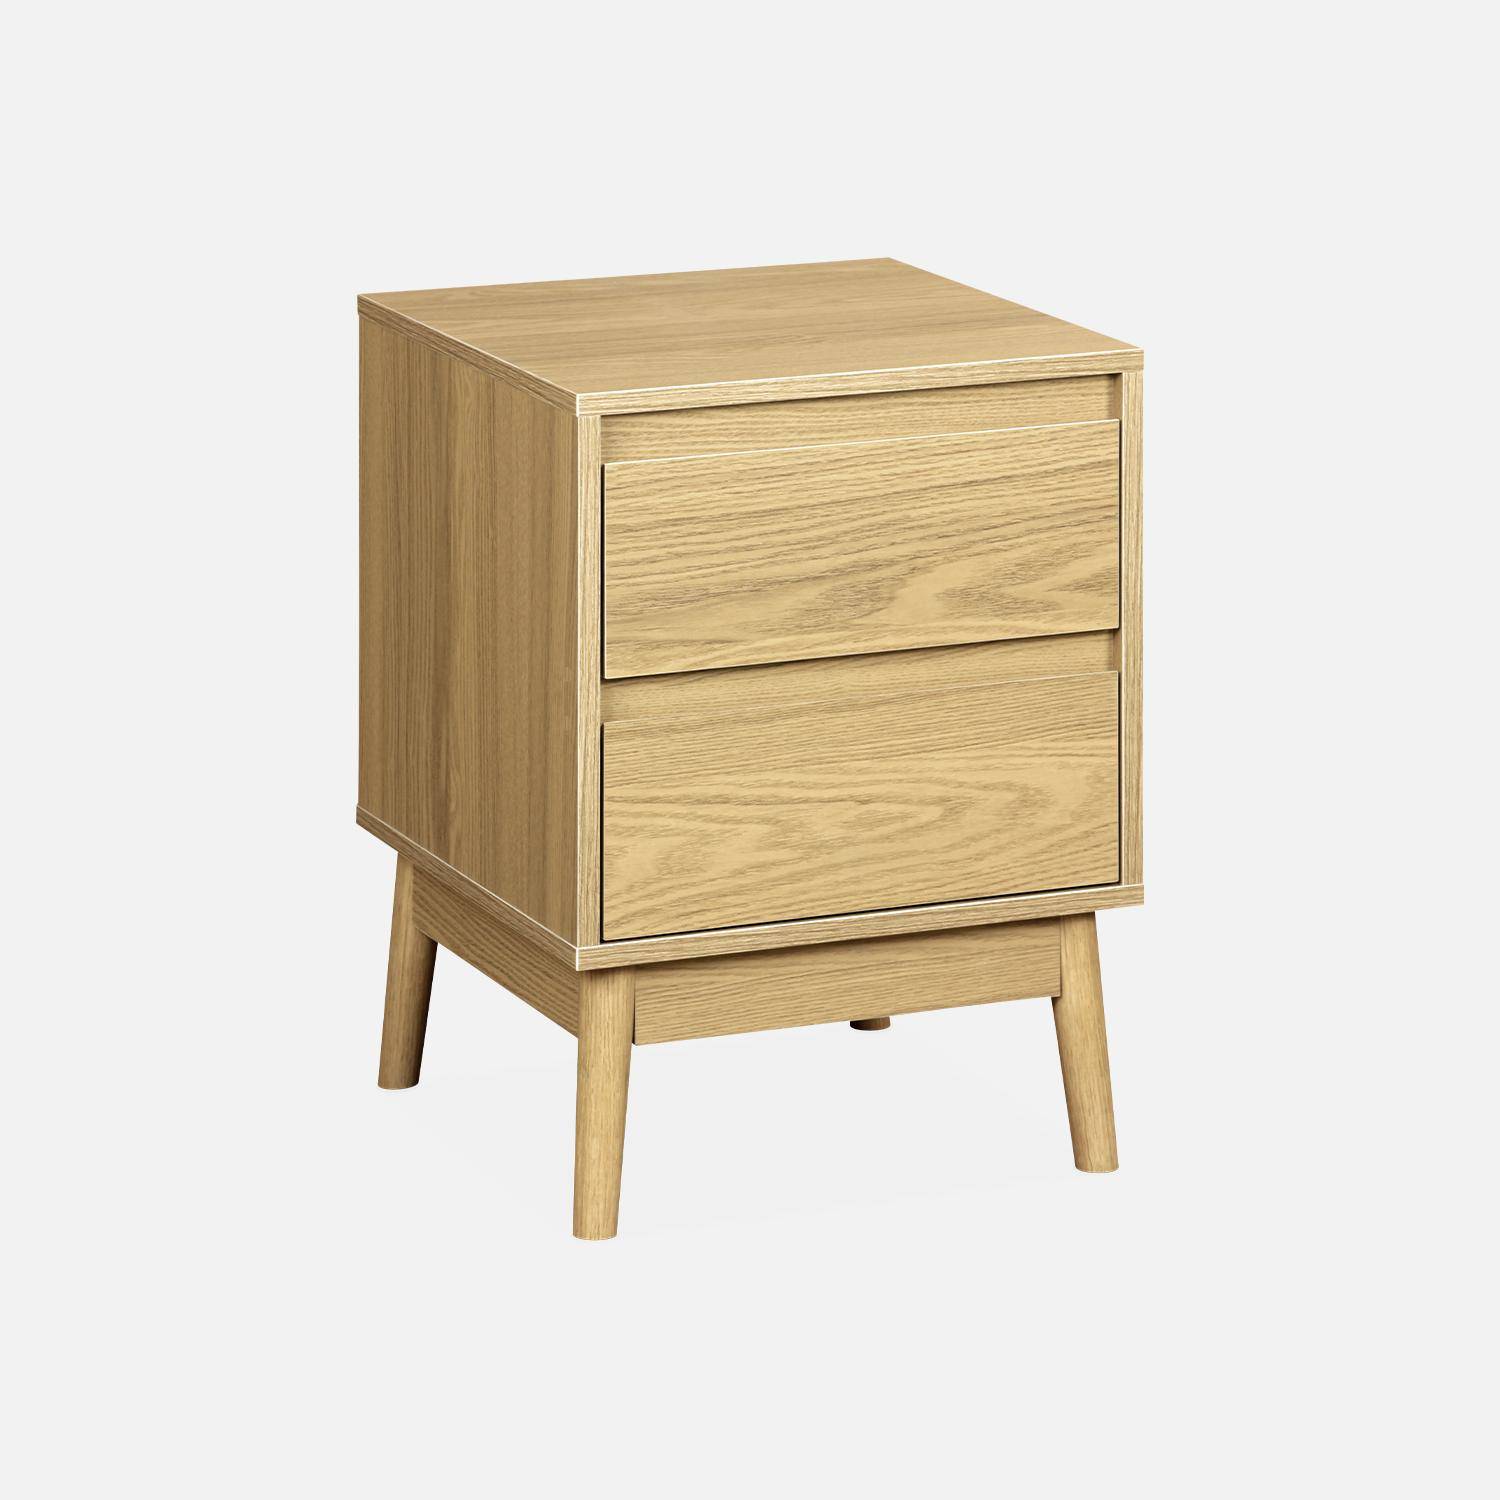 Wooden bedside table, two drawers - Dune Photo3